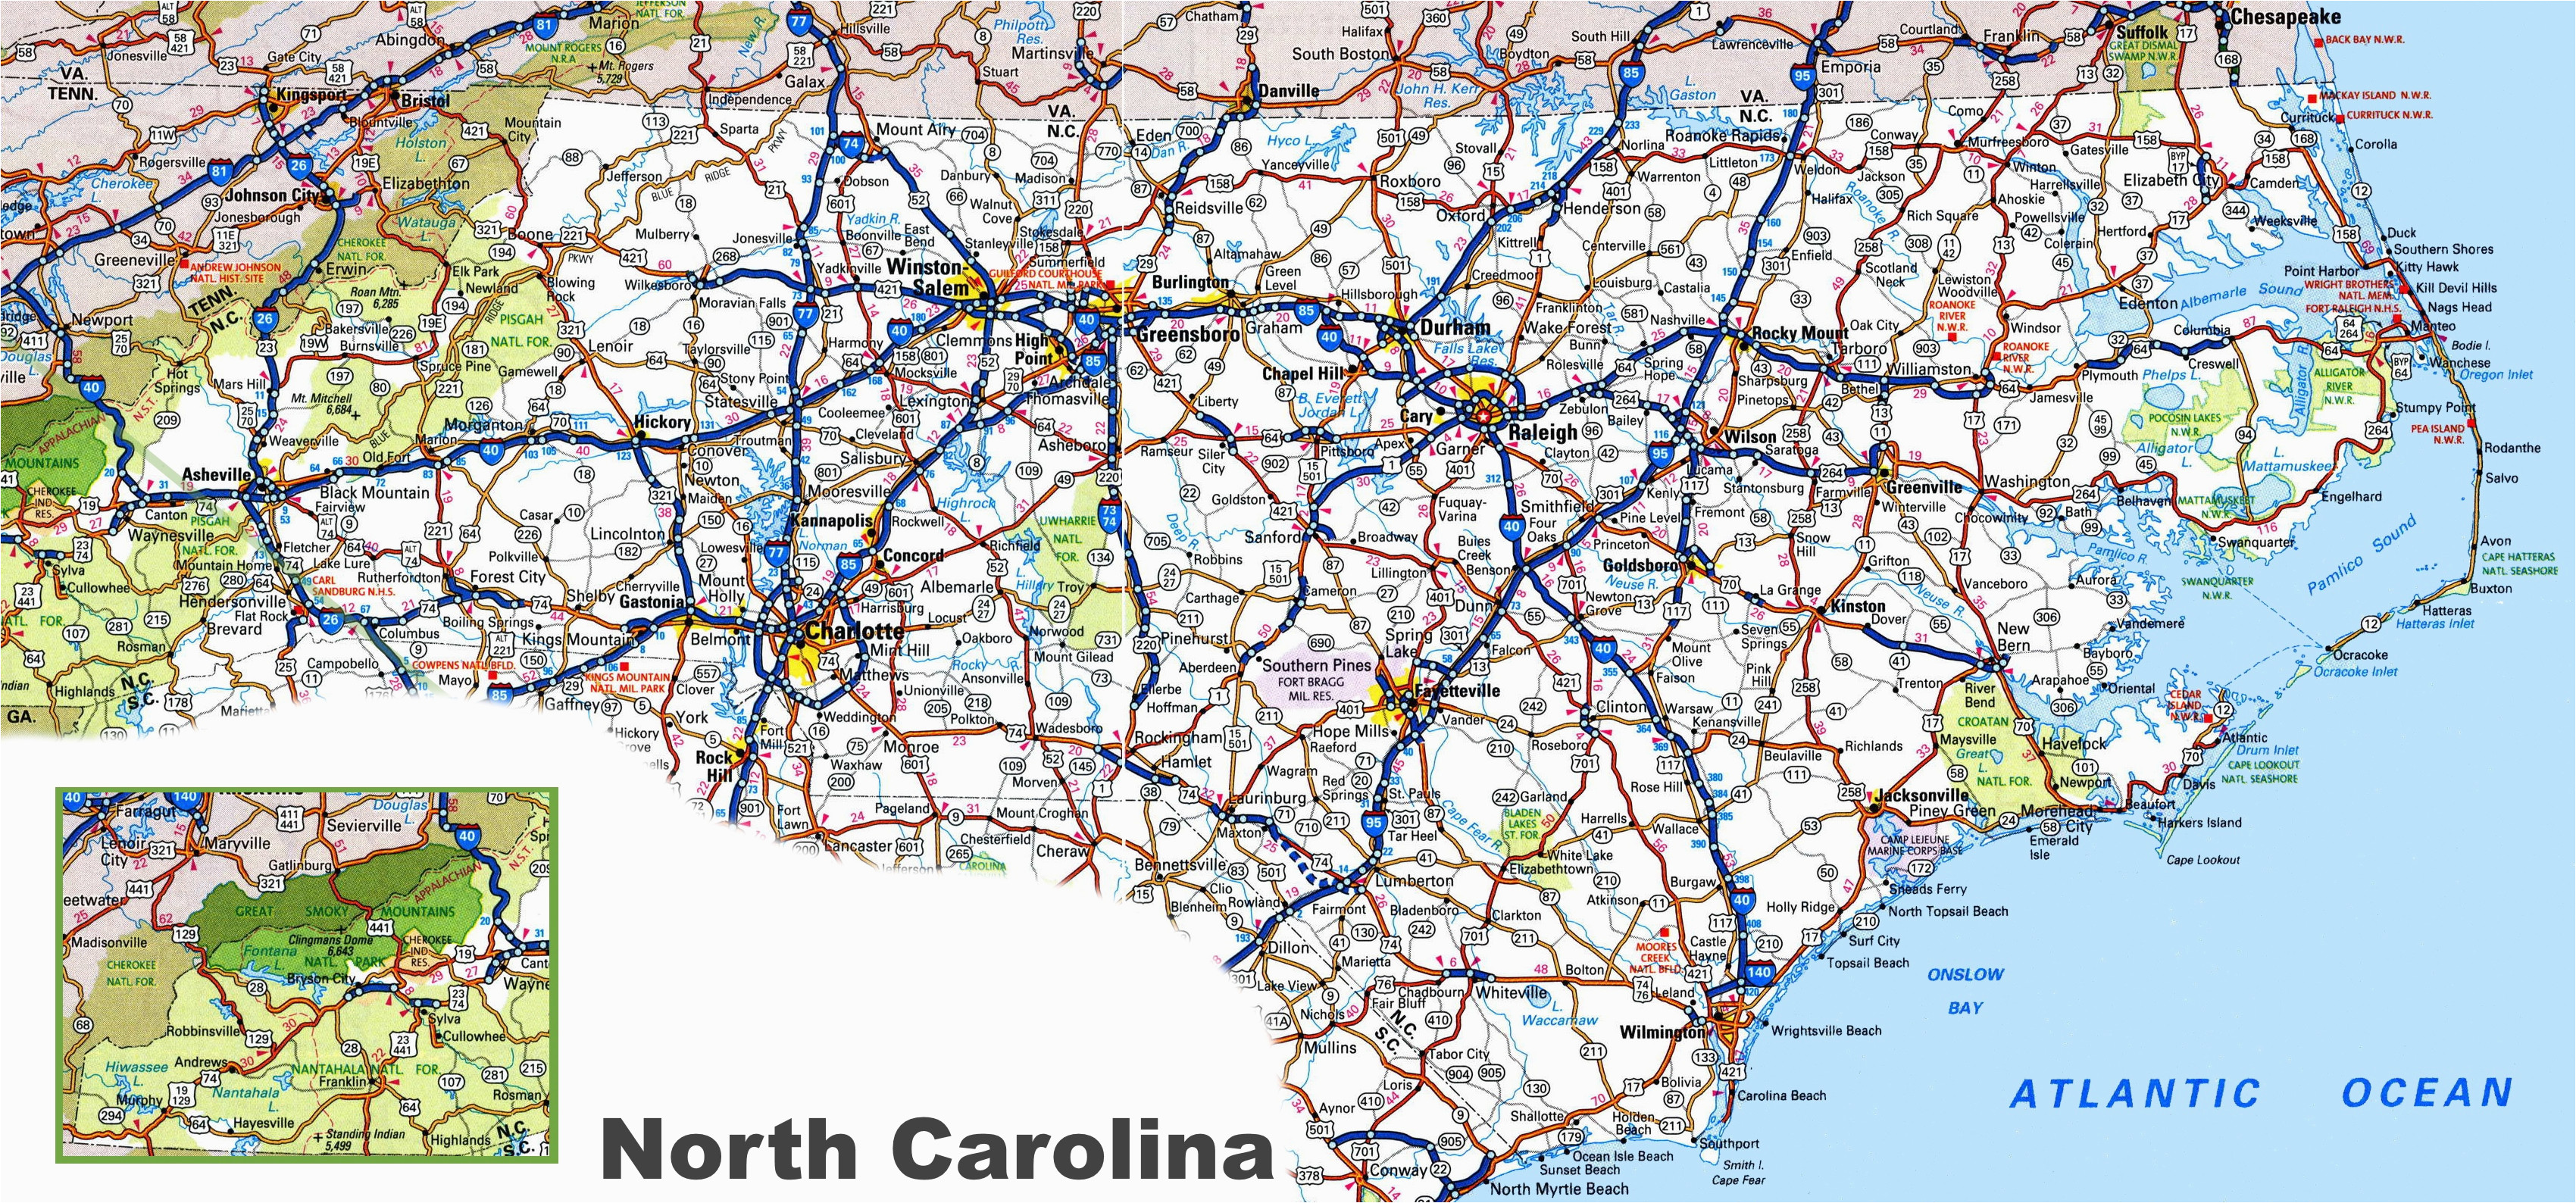 North Carolina Maps Of Towns And Cities North Carolina Road Map Of North Carolina Maps Of Towns And Cities 